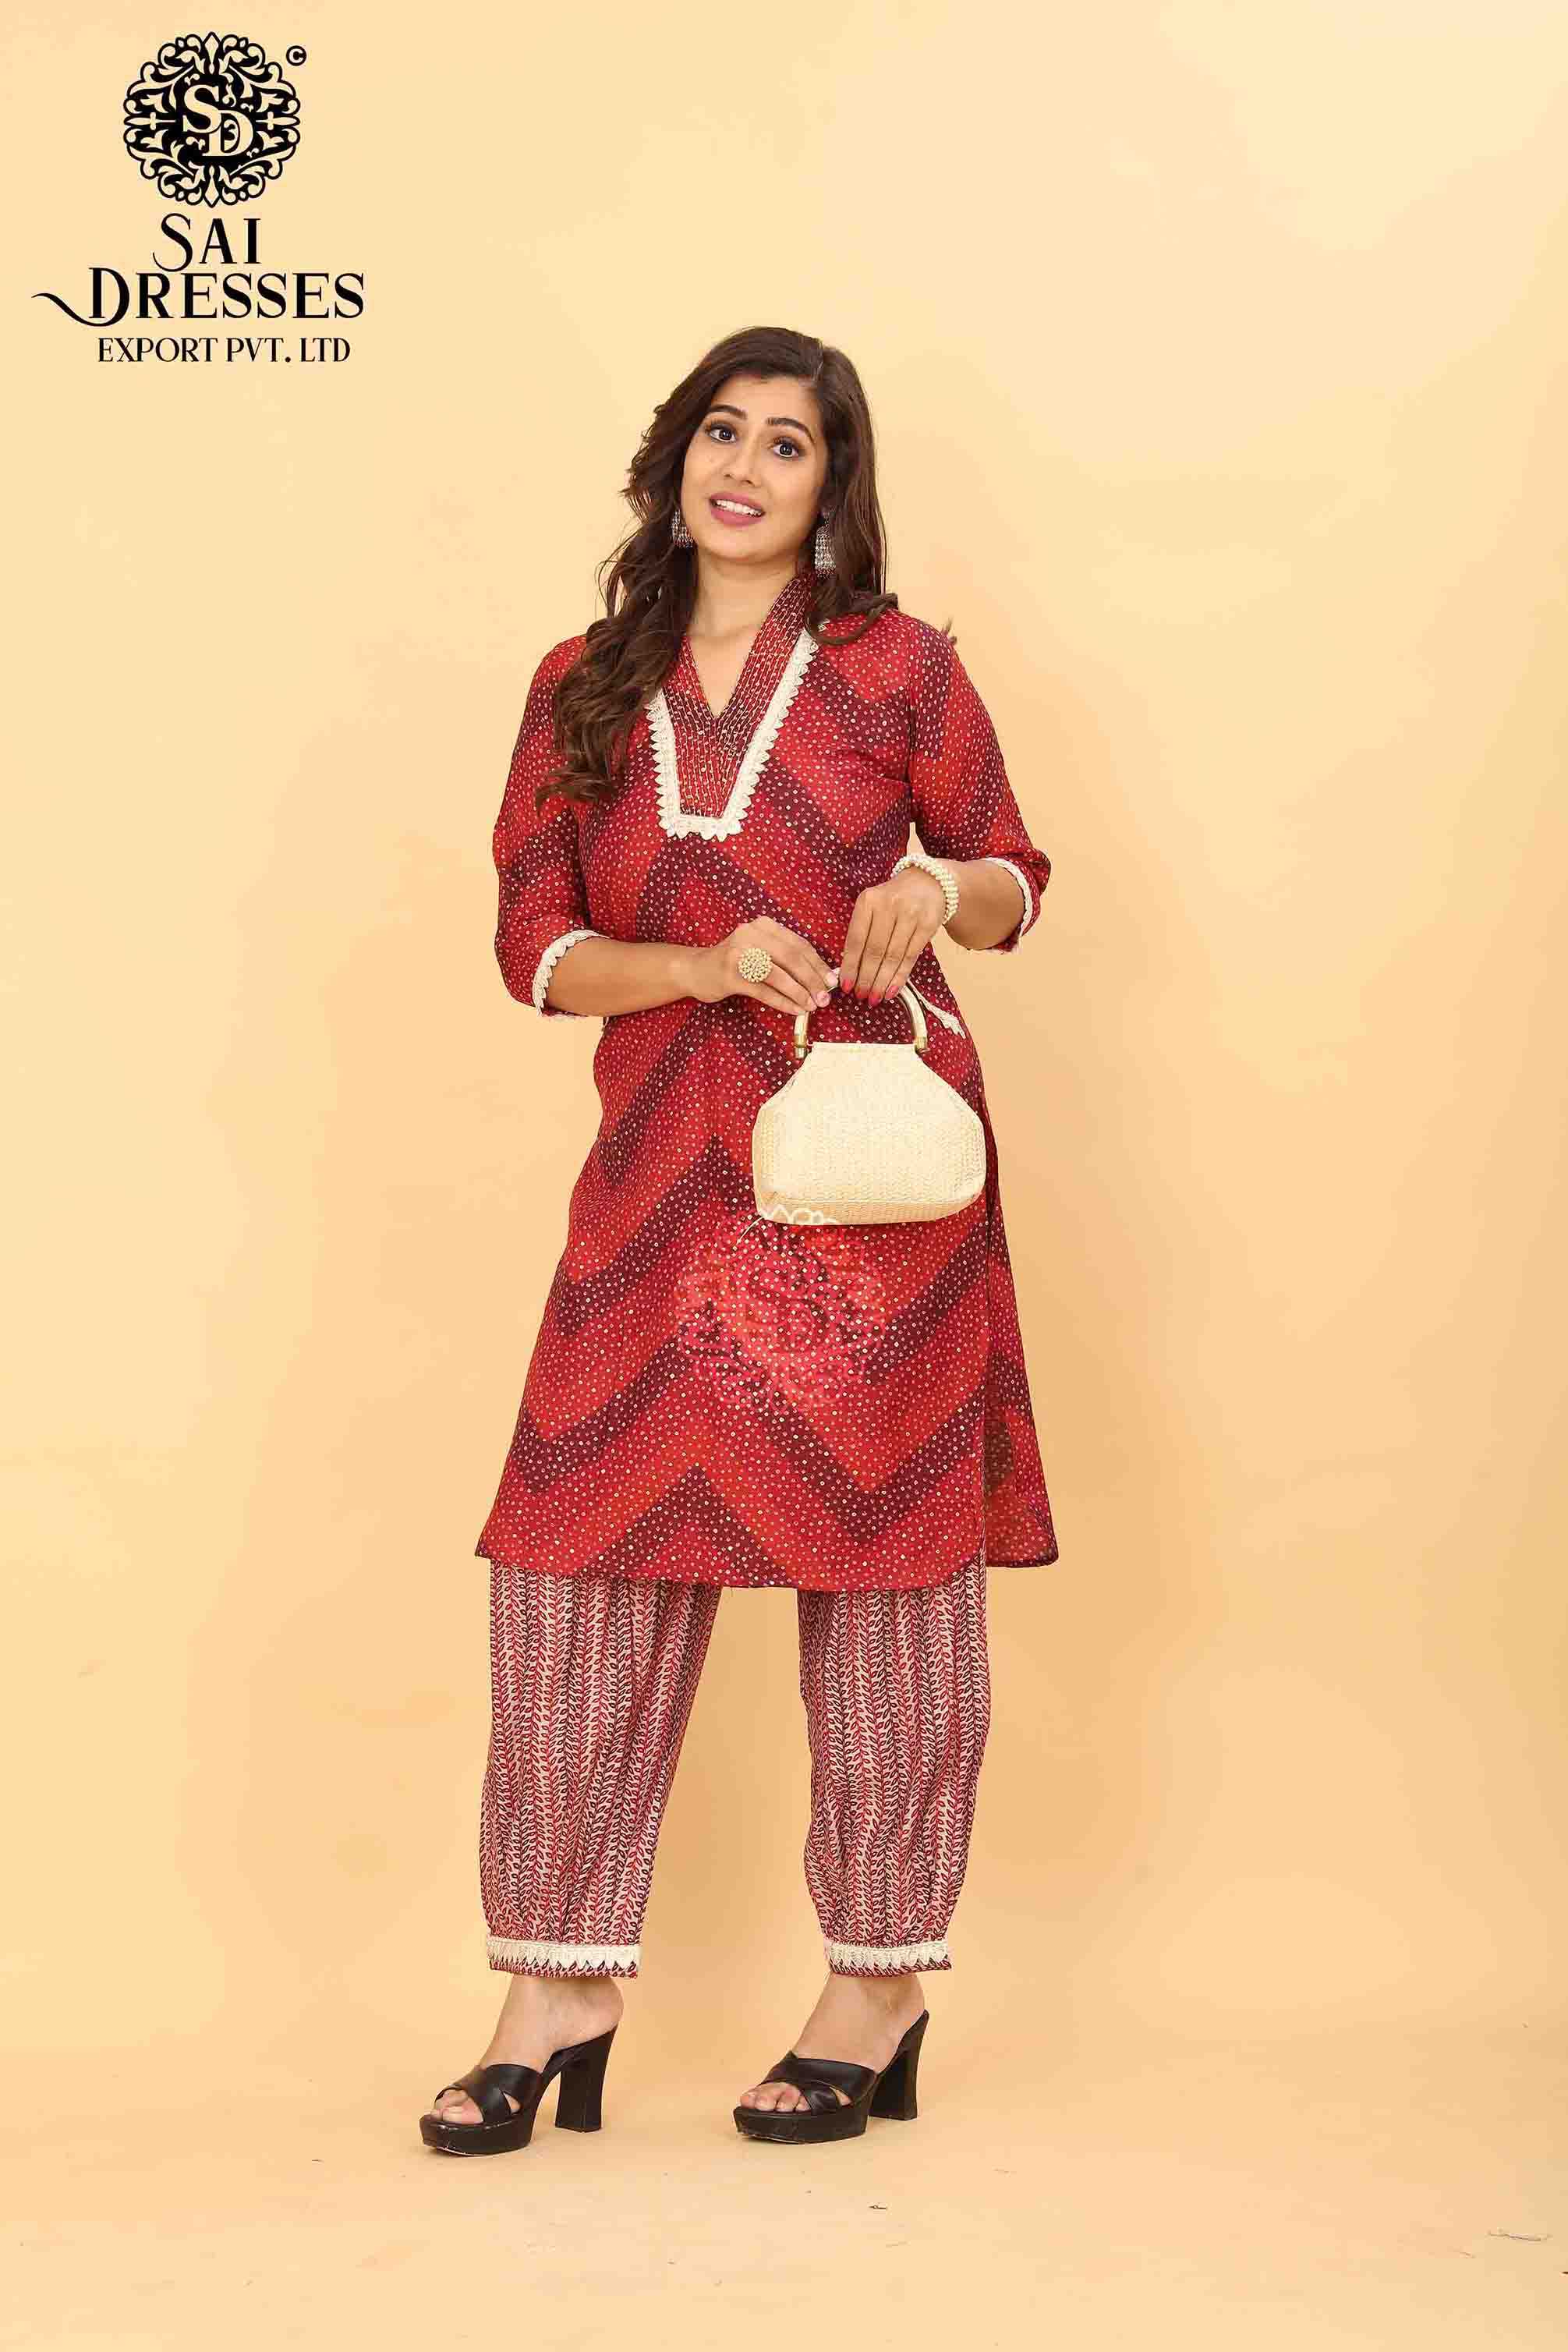 SAI DRESSES PRESENT D.NO SD 5021 READY TO EXCLUSIVE TRENDY WEAR PATHANI KURTA WITH AFGHANI PANT STYLE COMBO COLLECTION IN WHOLESALE RATE IN SURAT